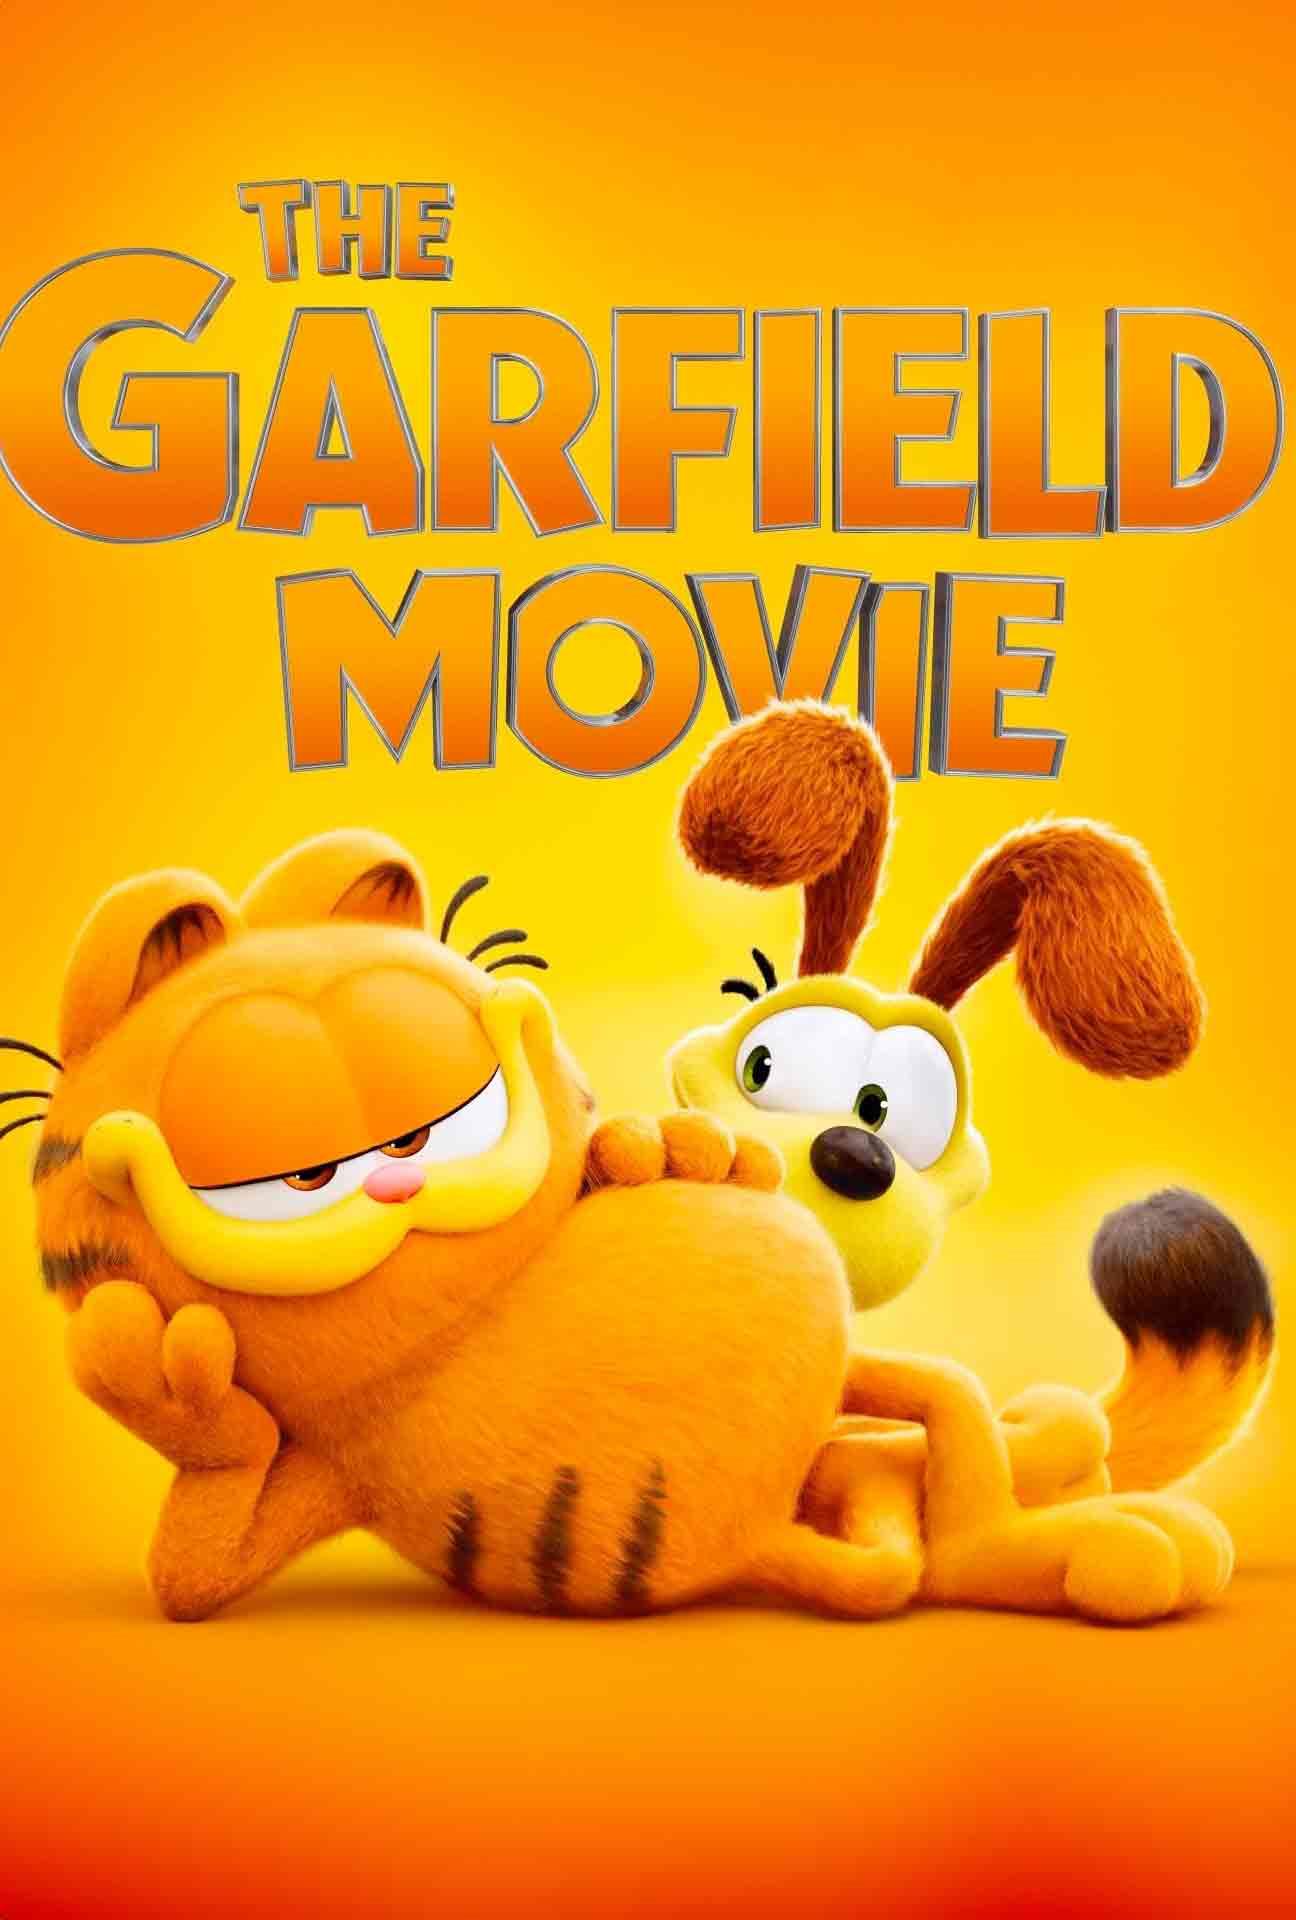 Movie Poster for The Garfield Movie